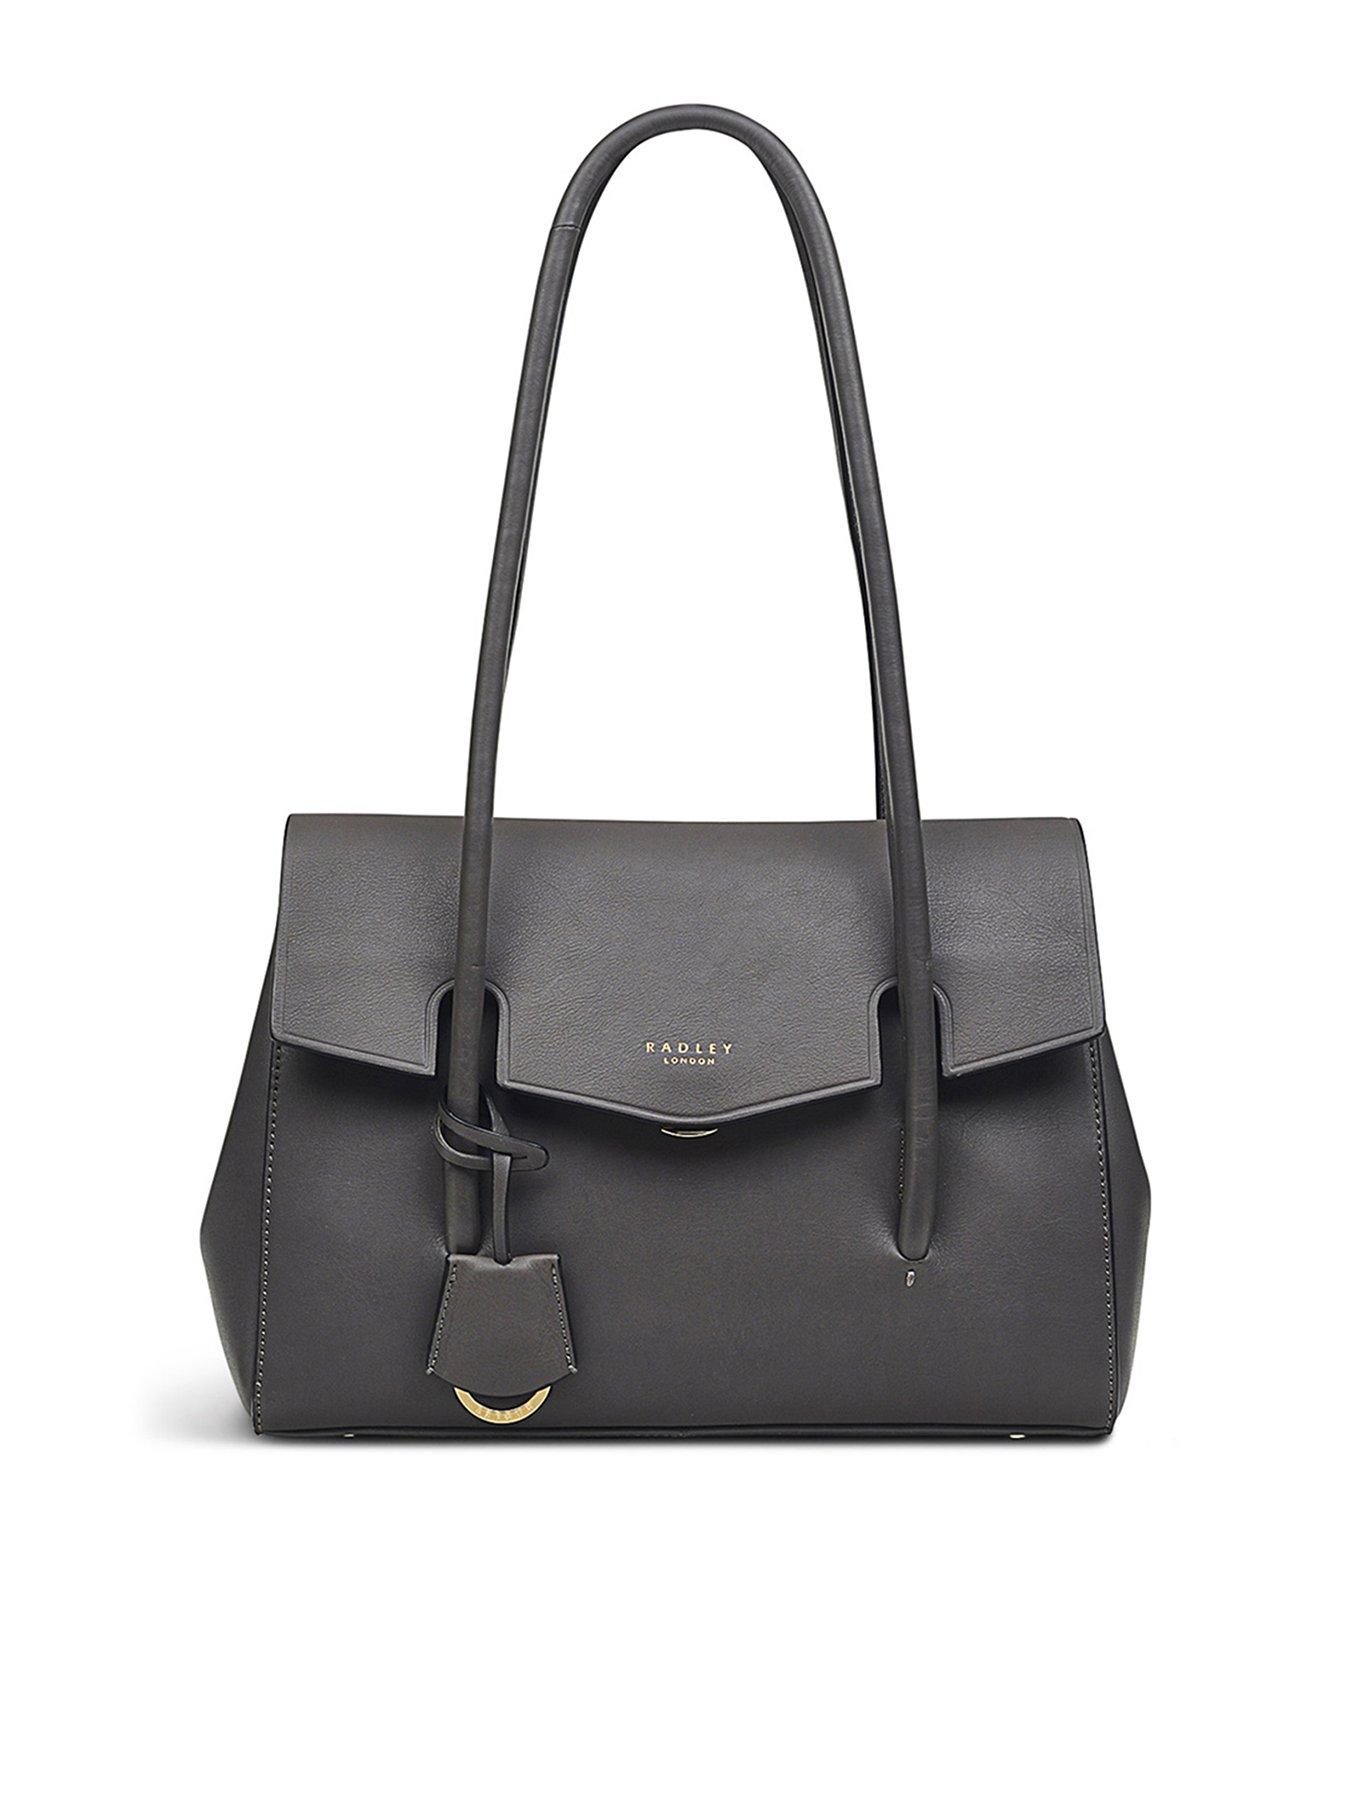  Apsley Road Leather Medium Flapover Tote Bag - Thunder